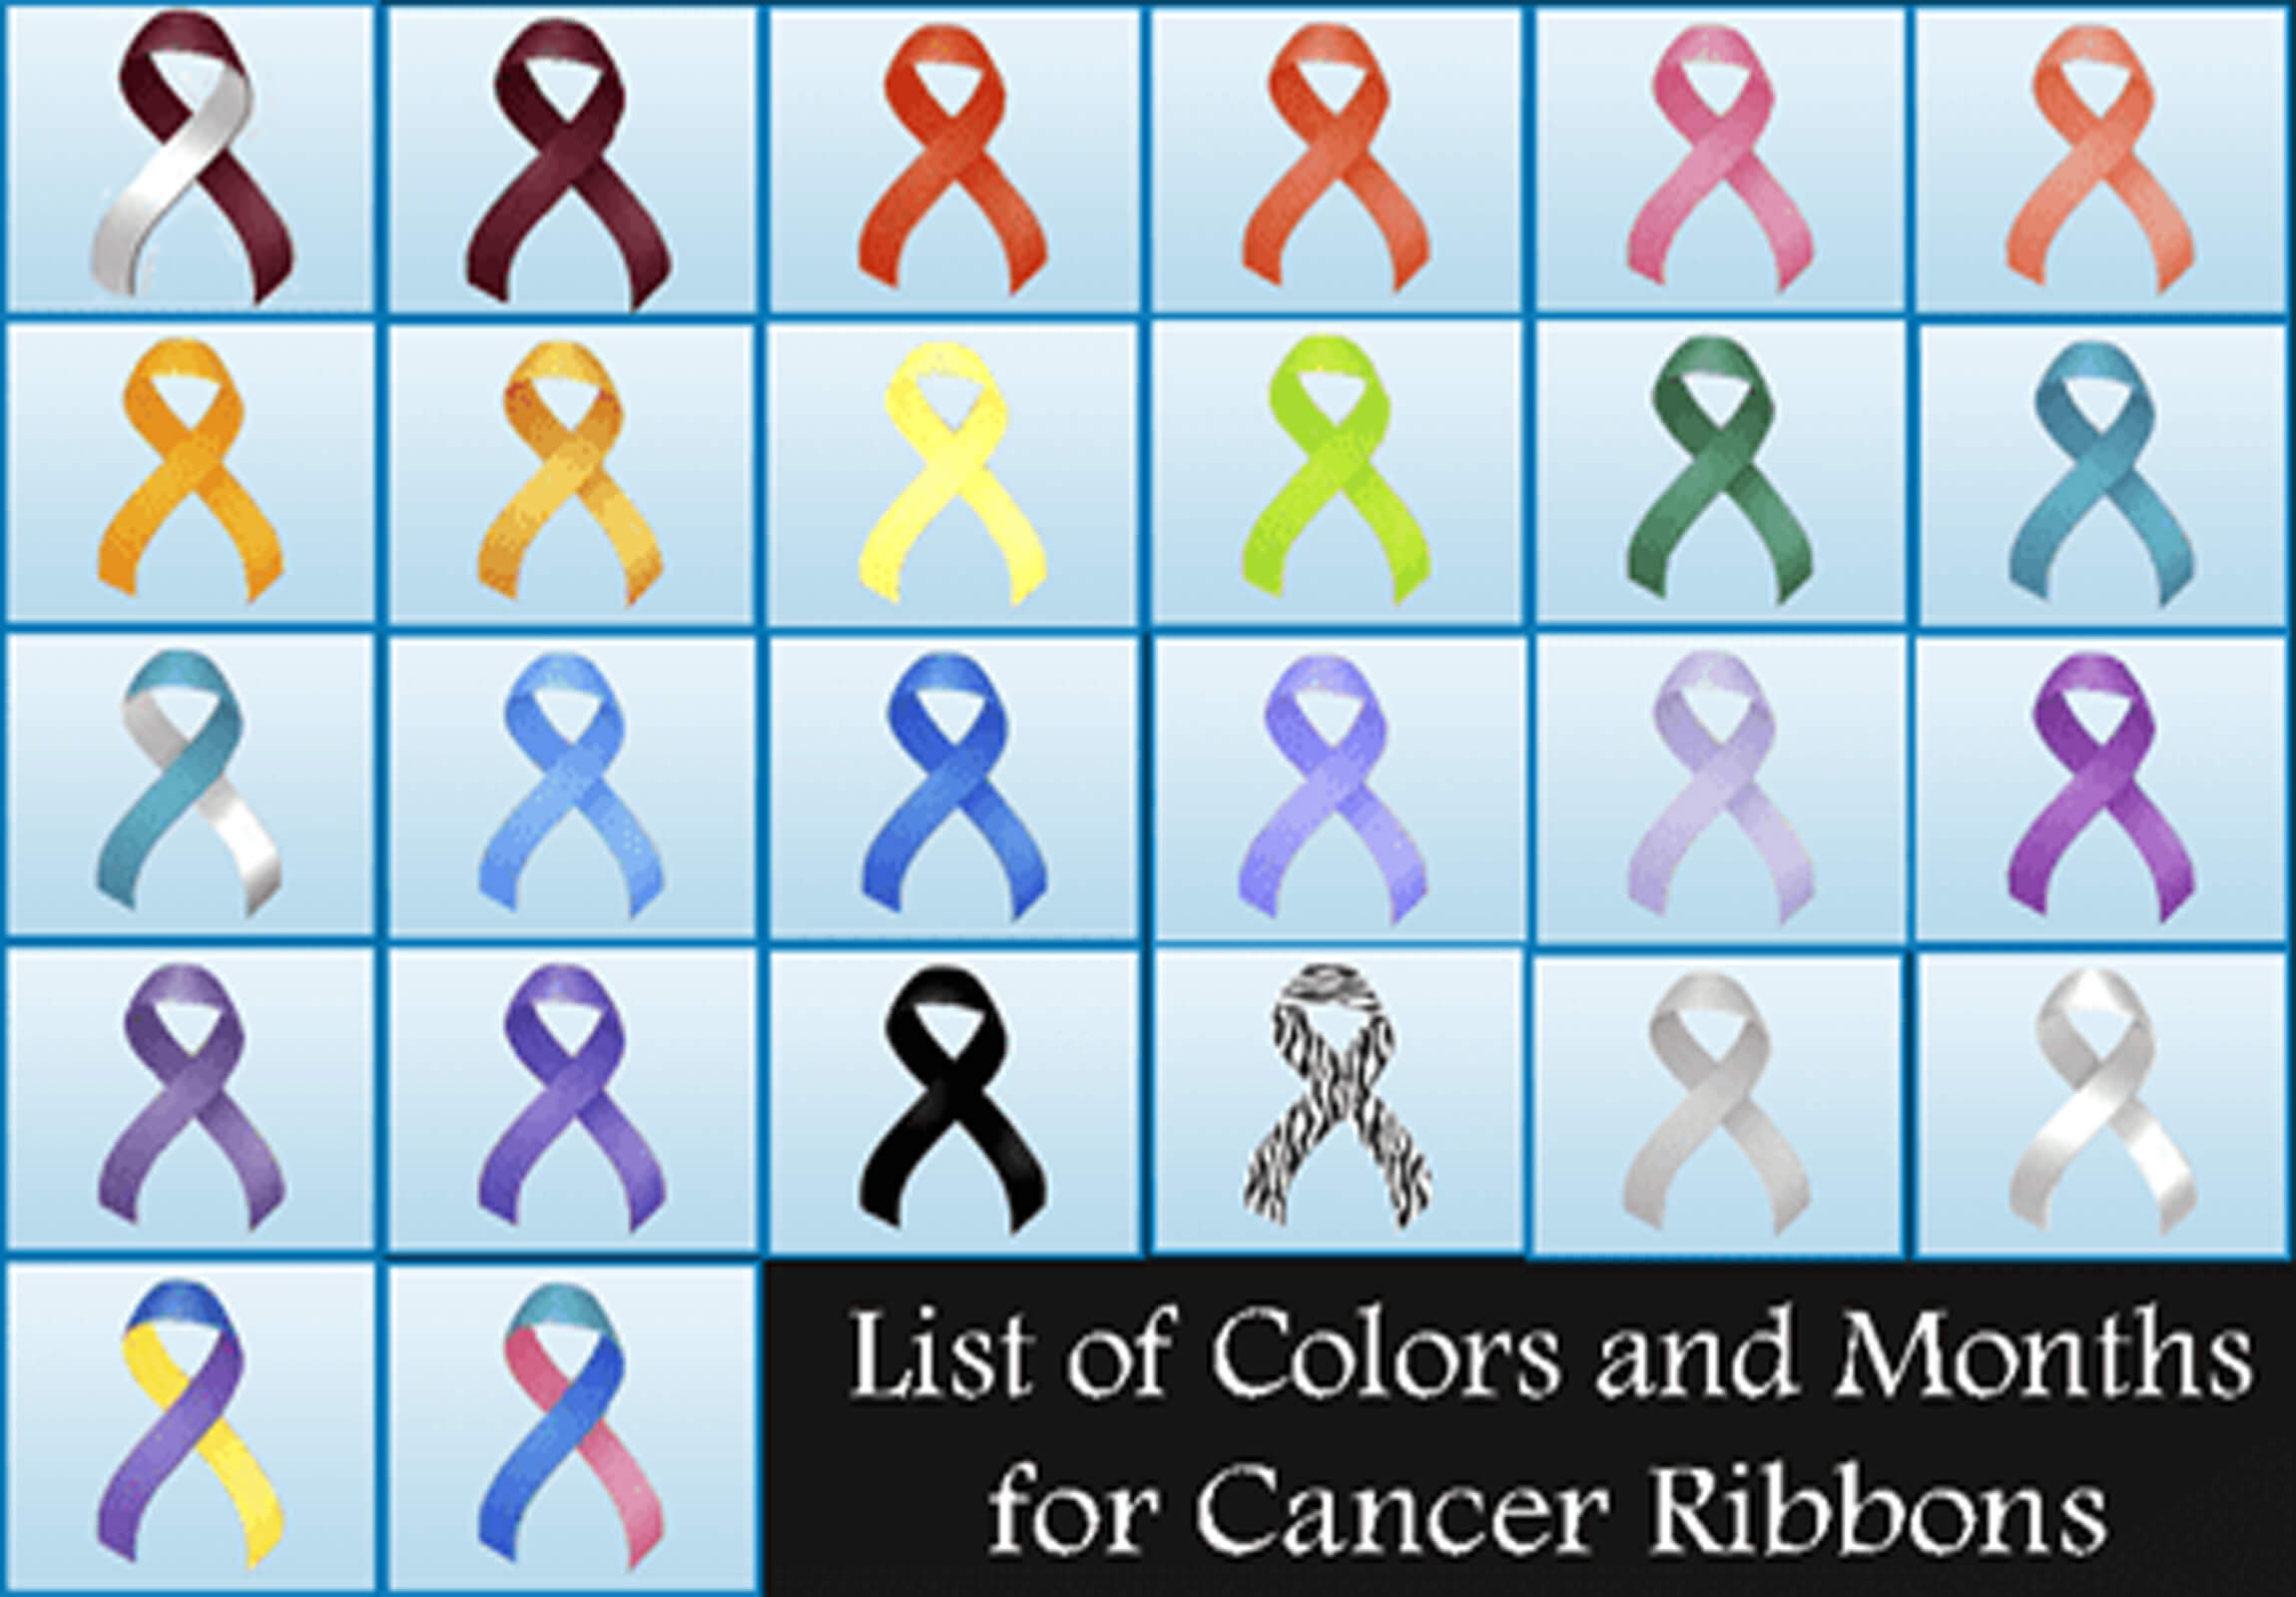 Colors and Months for Cancer Ribbons list